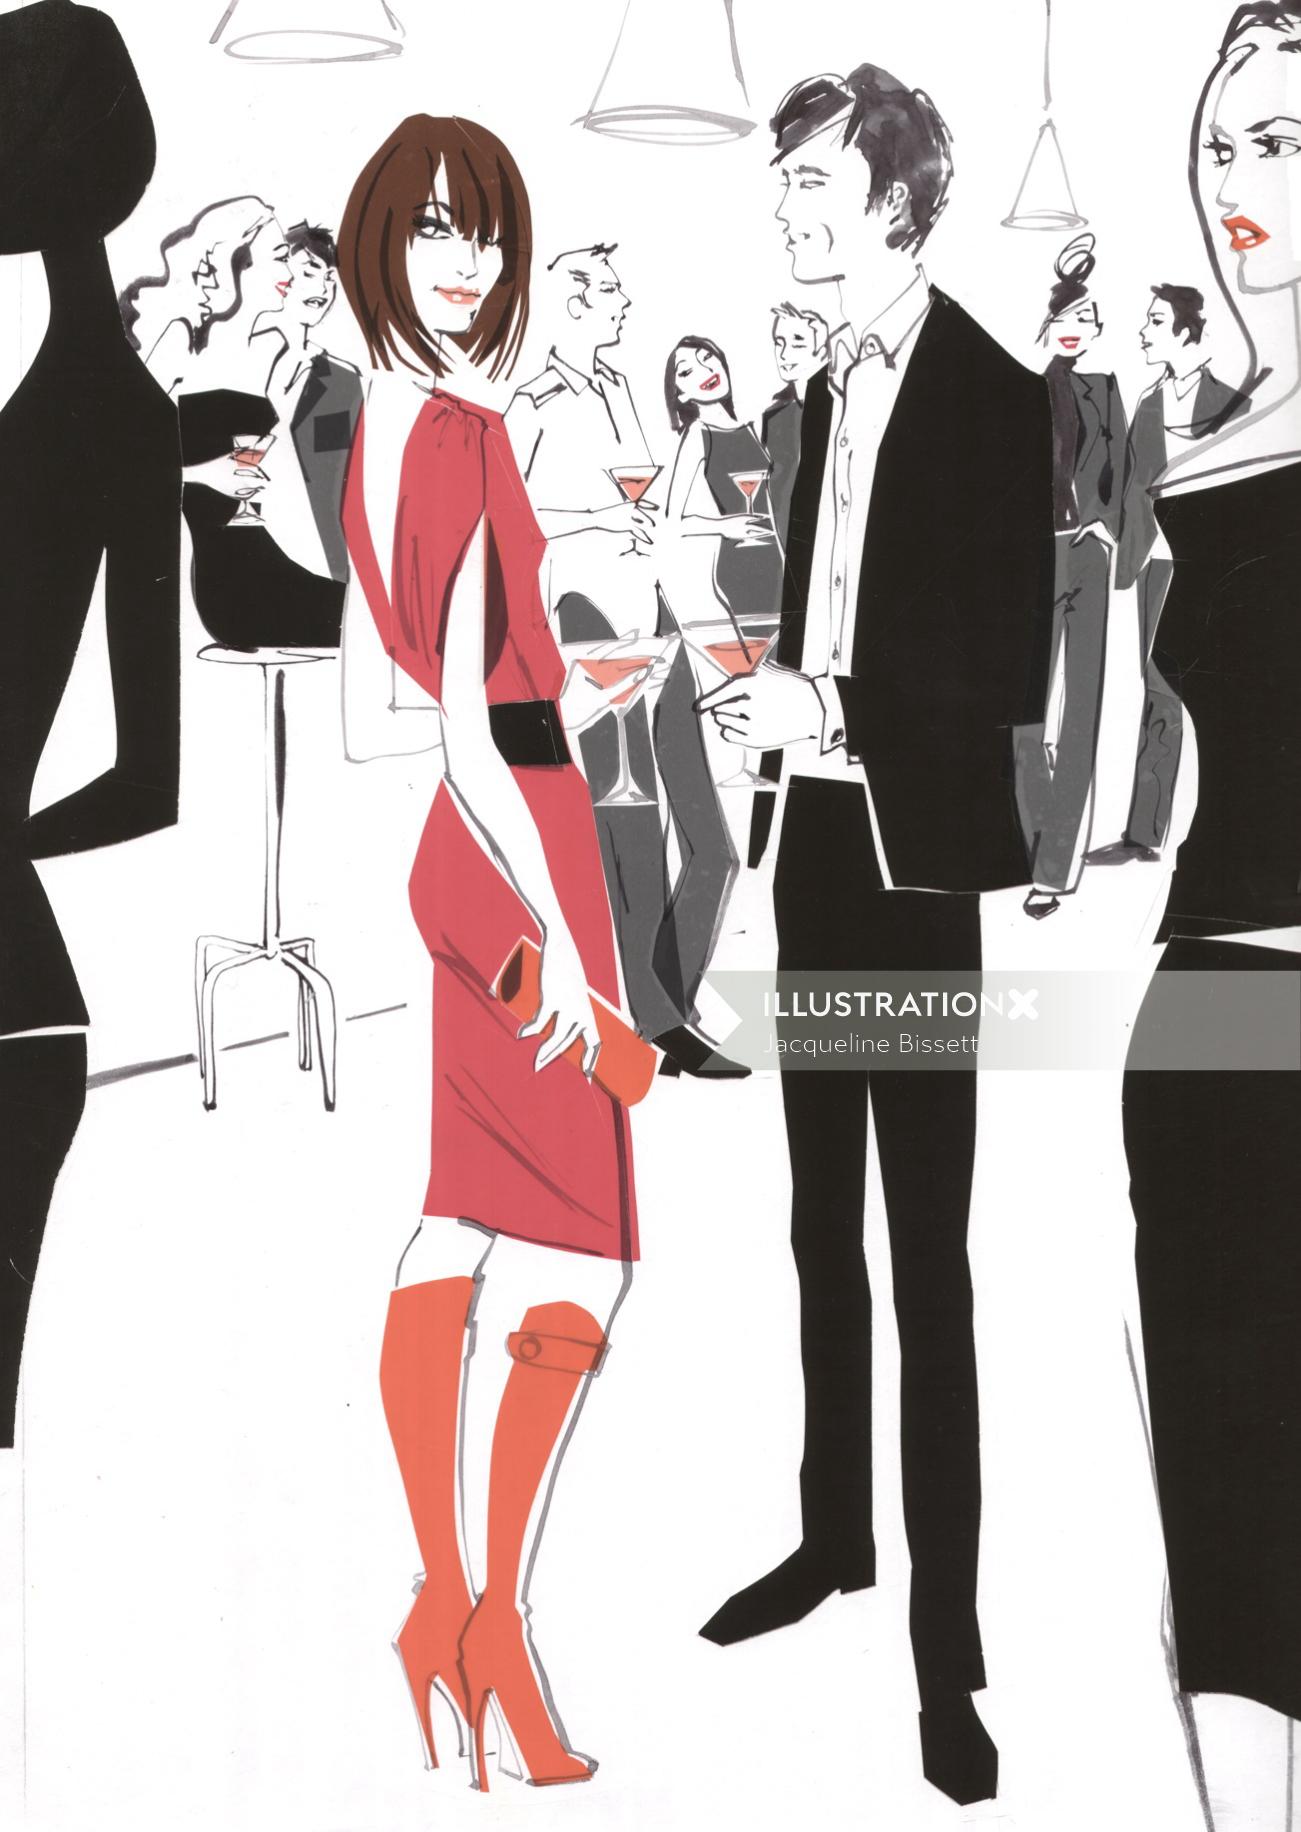 Couple Hang Out - illustration by Jacqueline Bissett